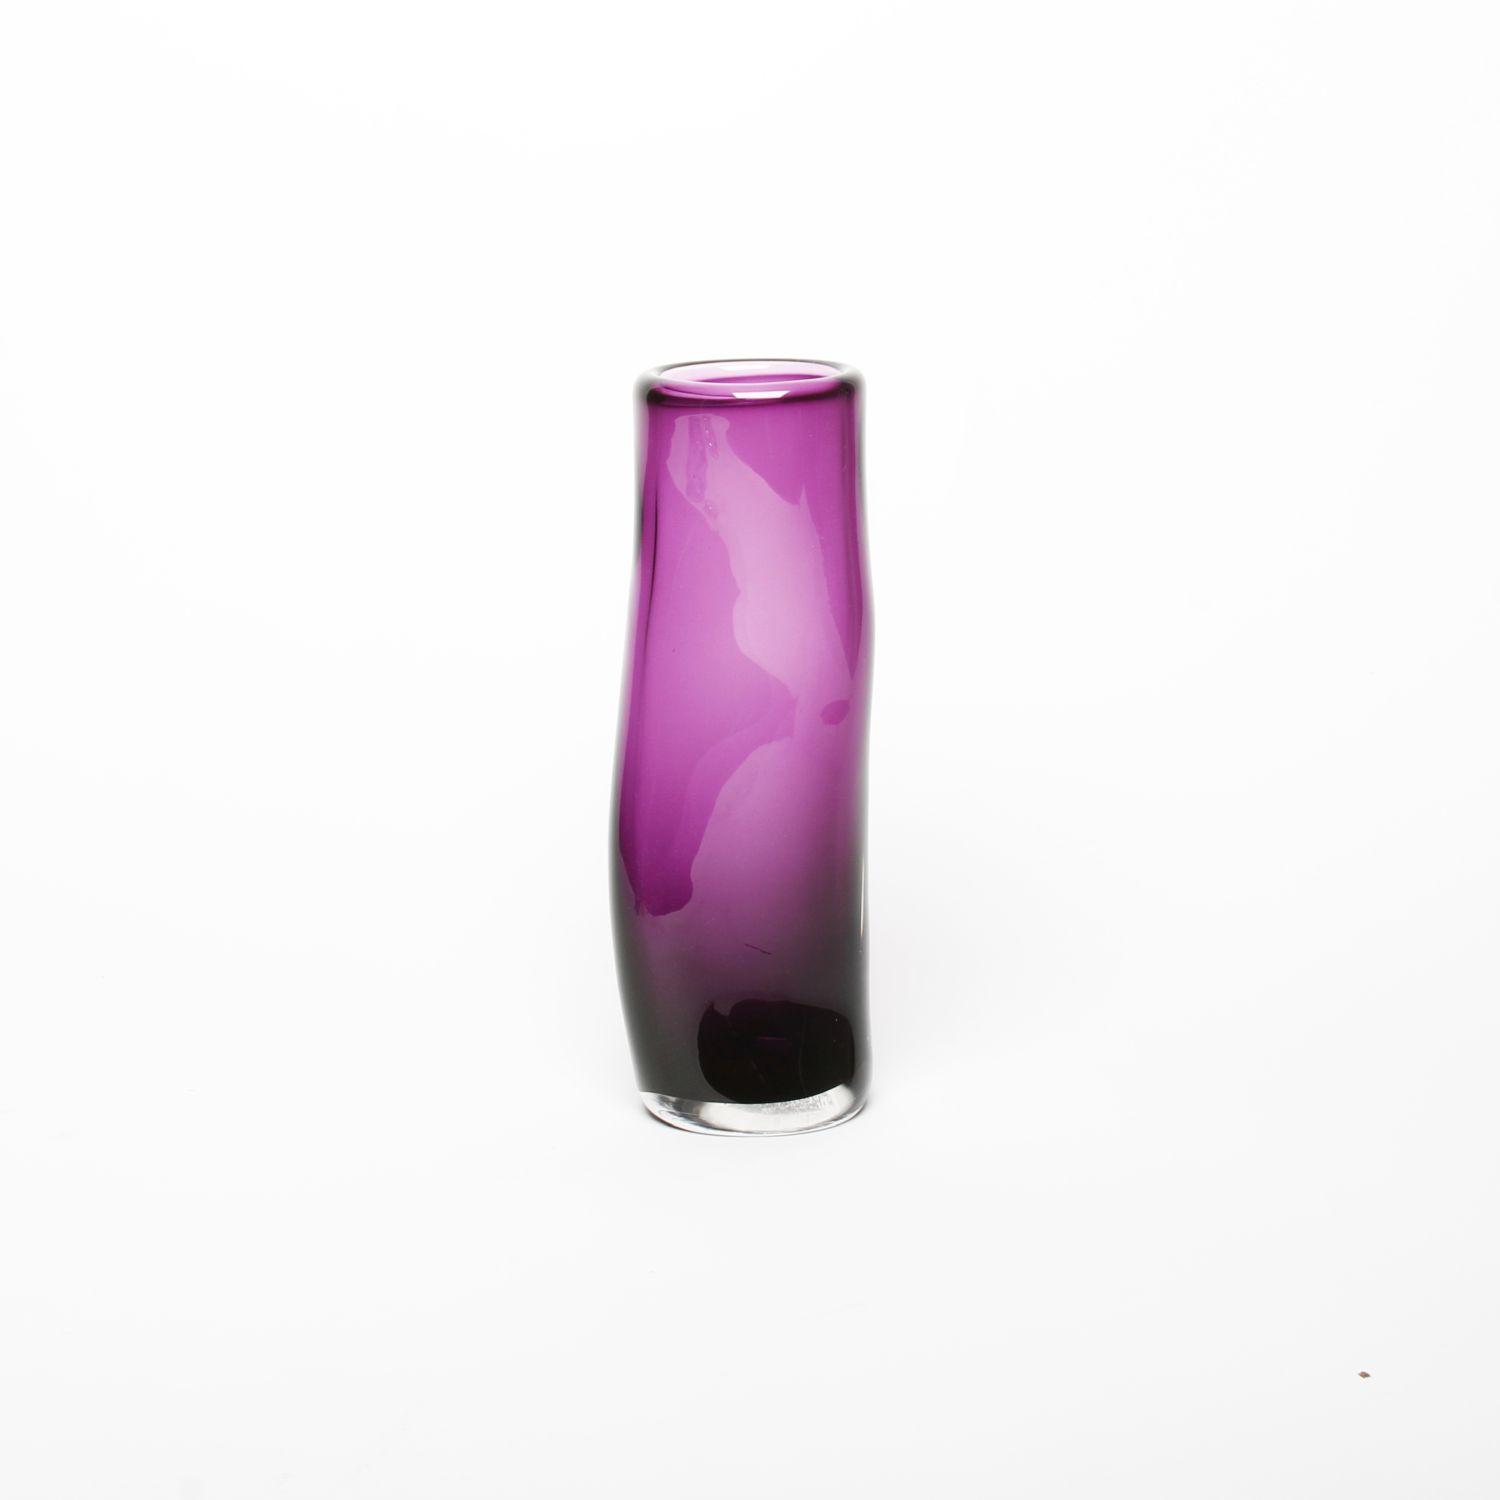 Jill Allan: Large Fat Lipped Vase (Assorted colours) Product Image 3 of 7